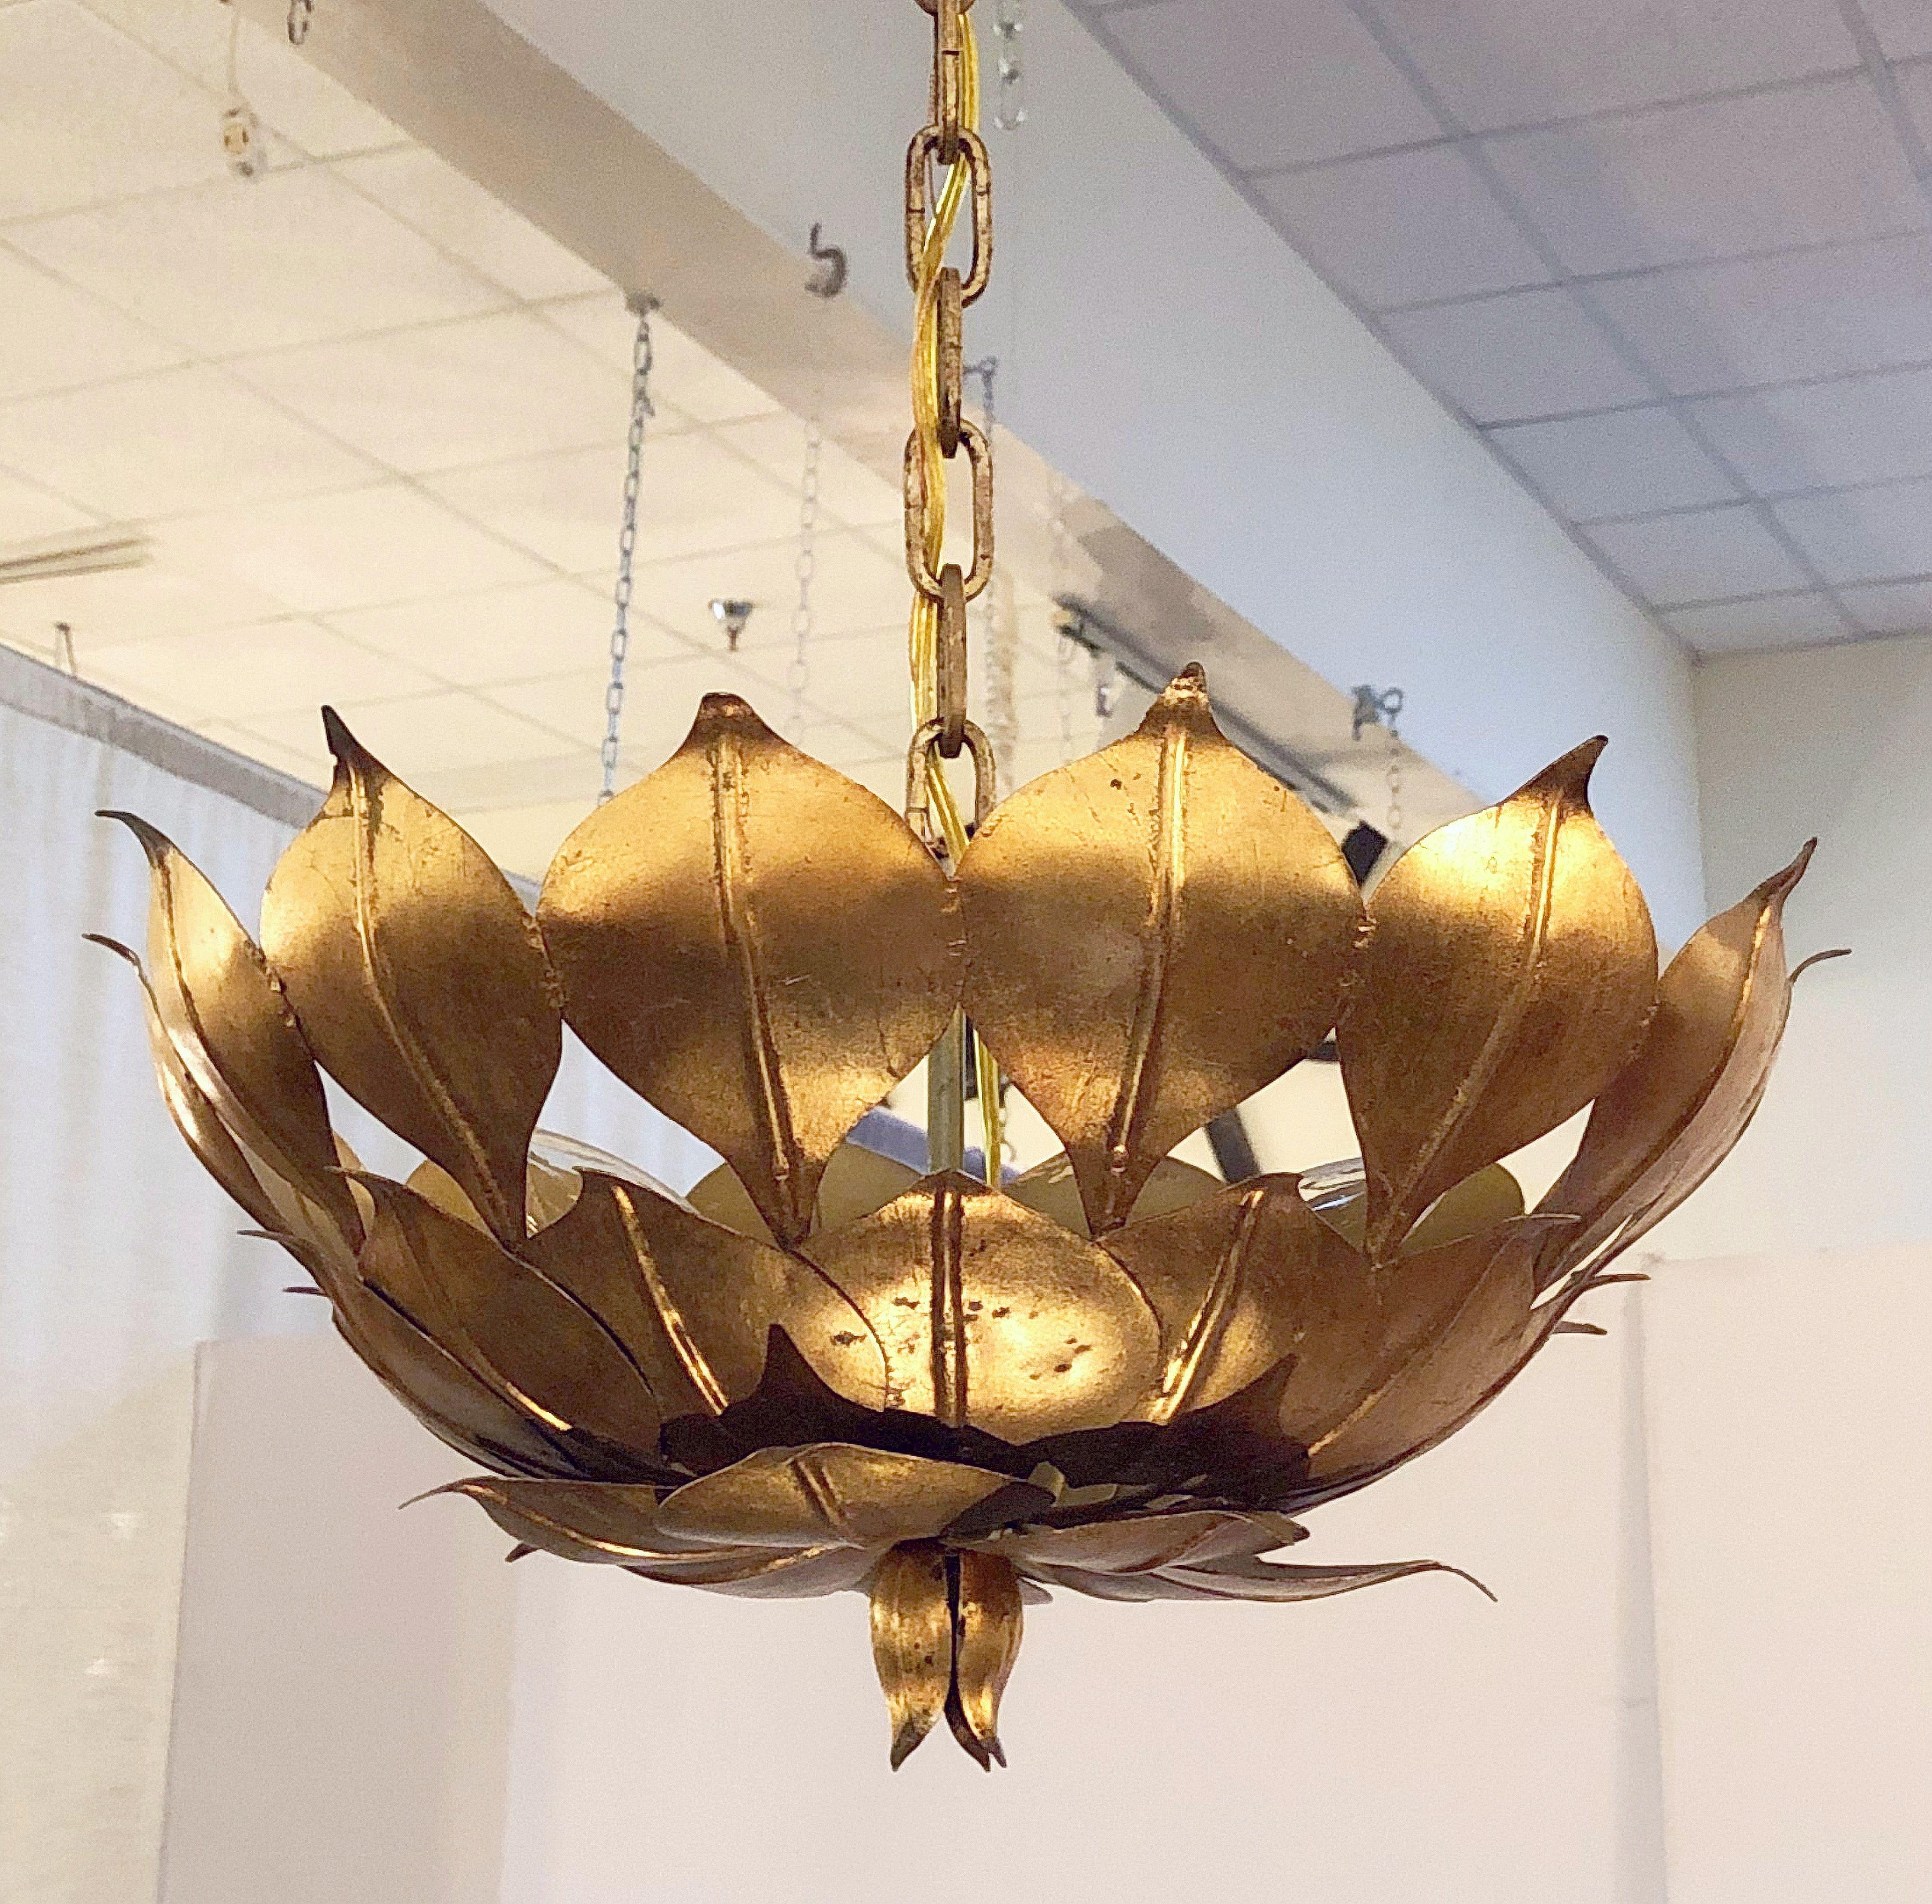 A handsome French three-light hanging light fixture or chandelier (18 inches diameter) of gilt metal featuring a lotus leaves or layered leaf design, with down-facing finial.

U.S. wired, Ready for display.